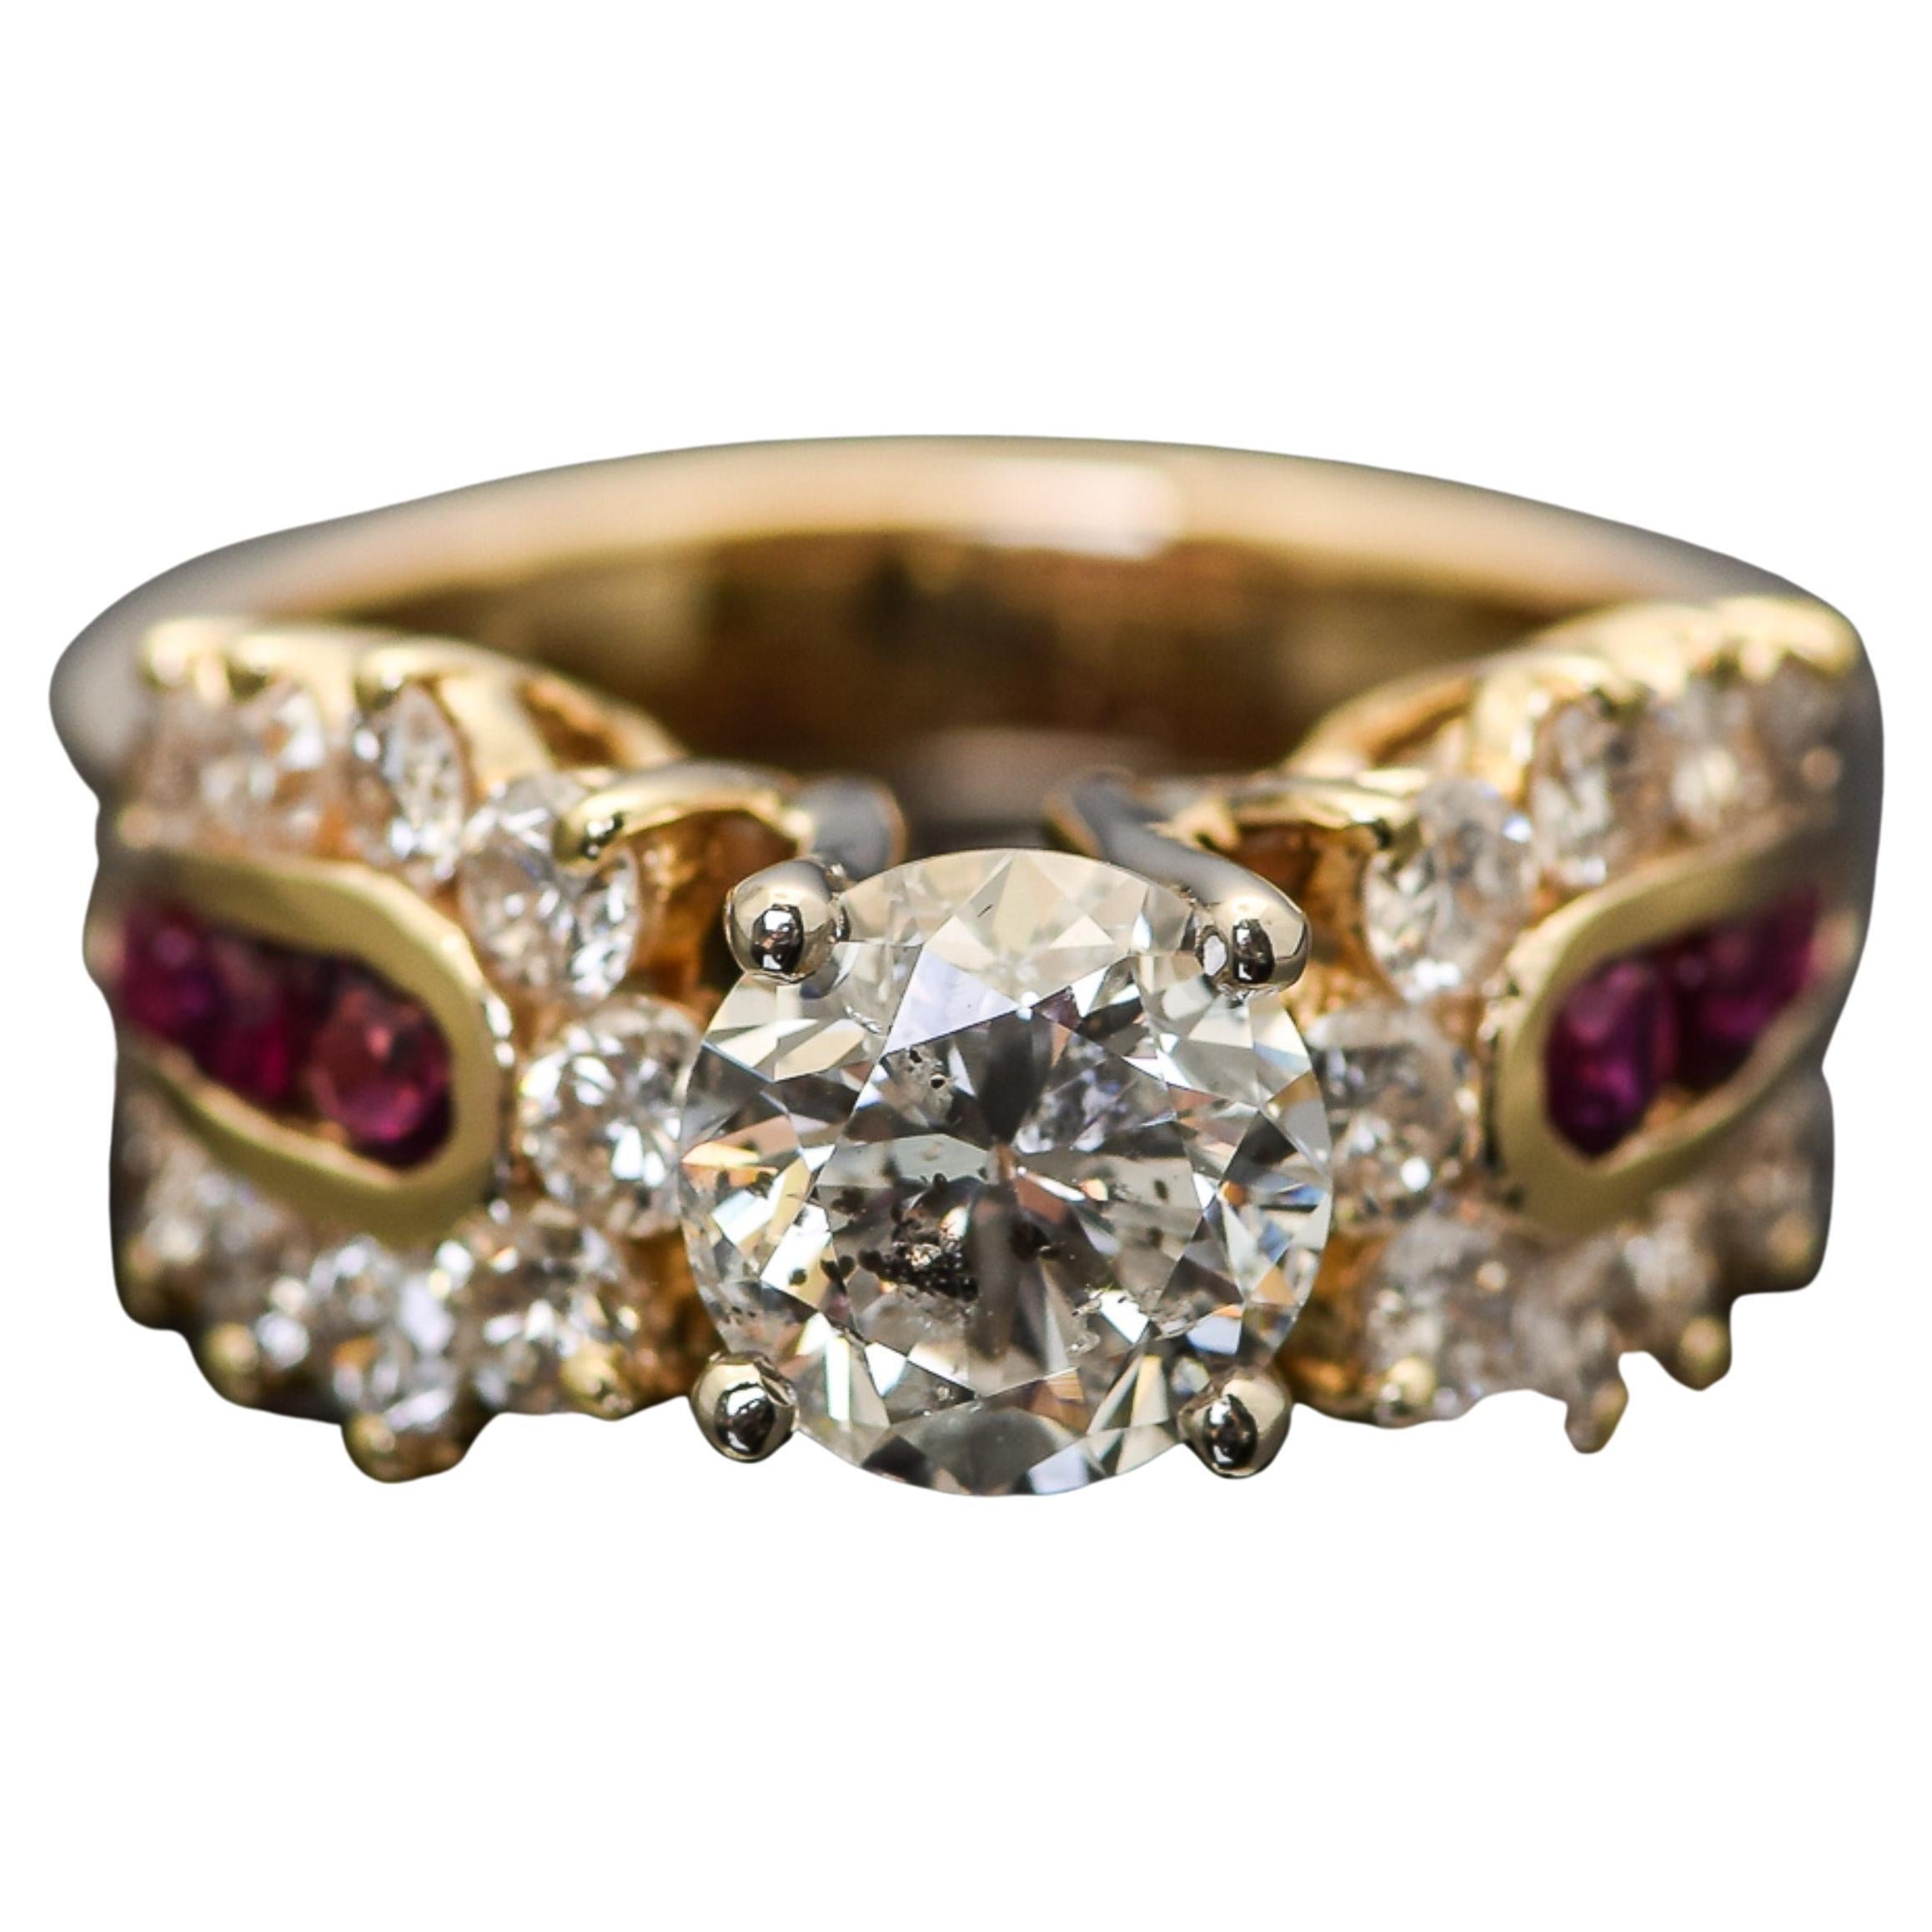 For Sale:  Certified 2.43 Carat Diamond Ruby Art Deco Style Engagement Ring in 18K Gold